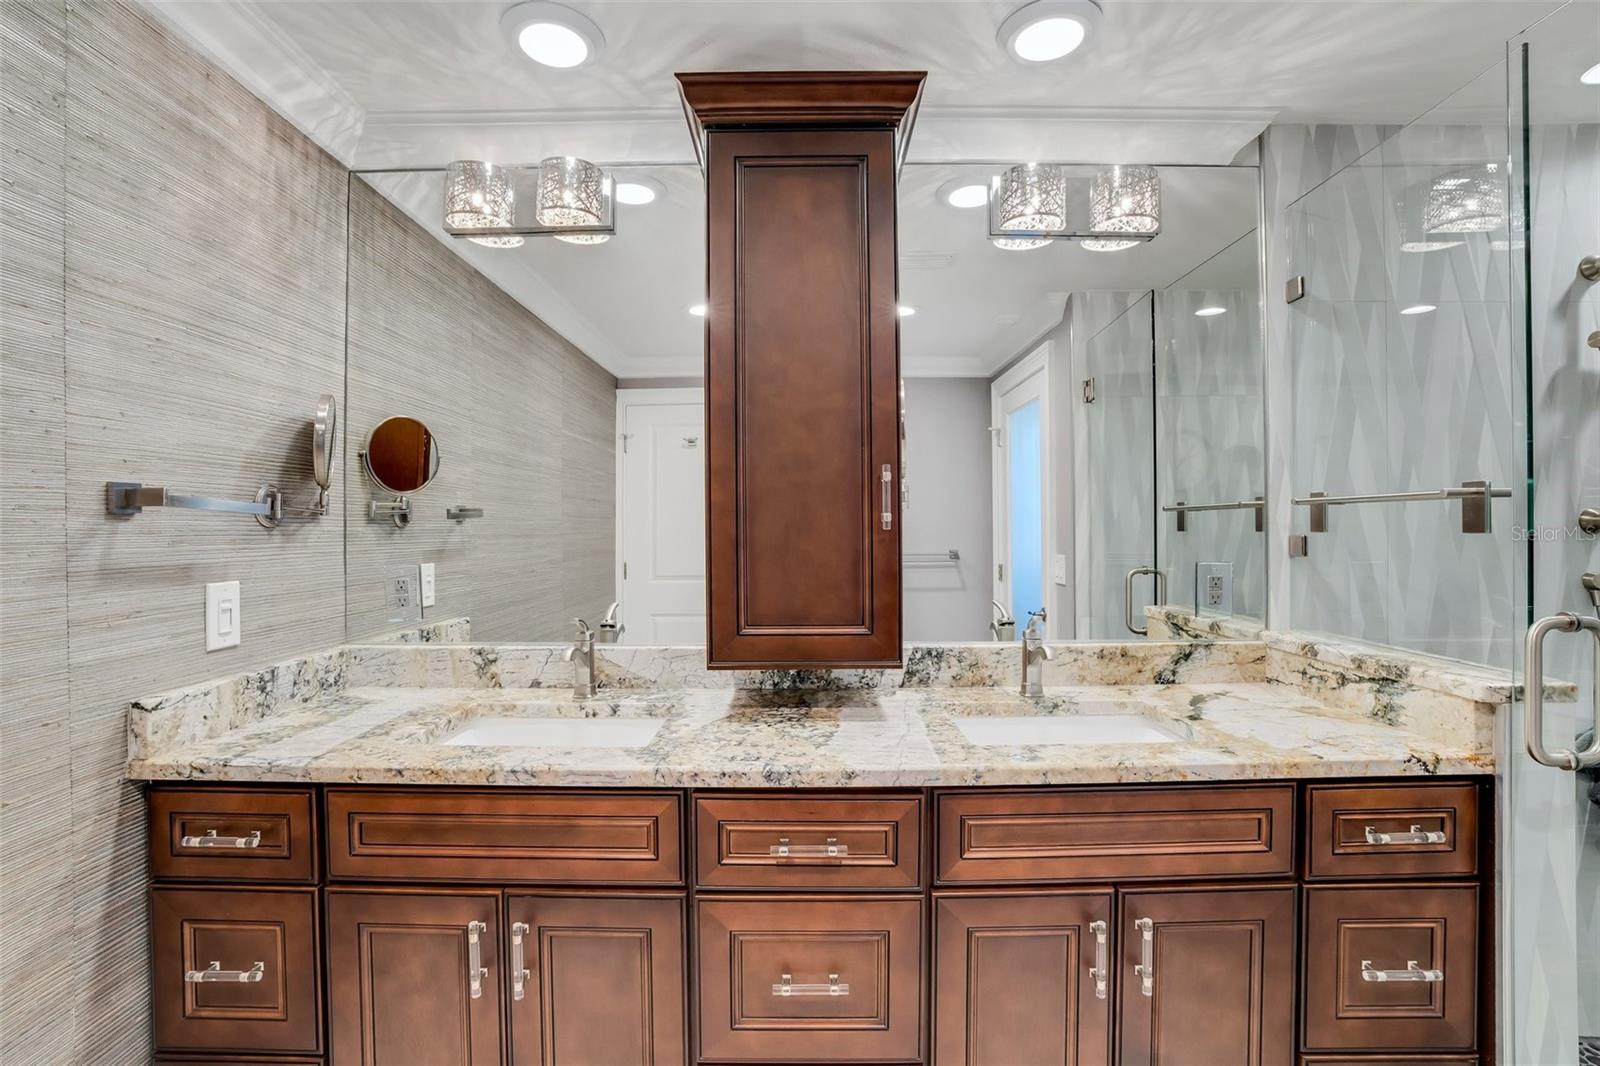 Primary Bathroom with double sinks, matching stone countertops throughout the home, custom soft close solid wood cabinets